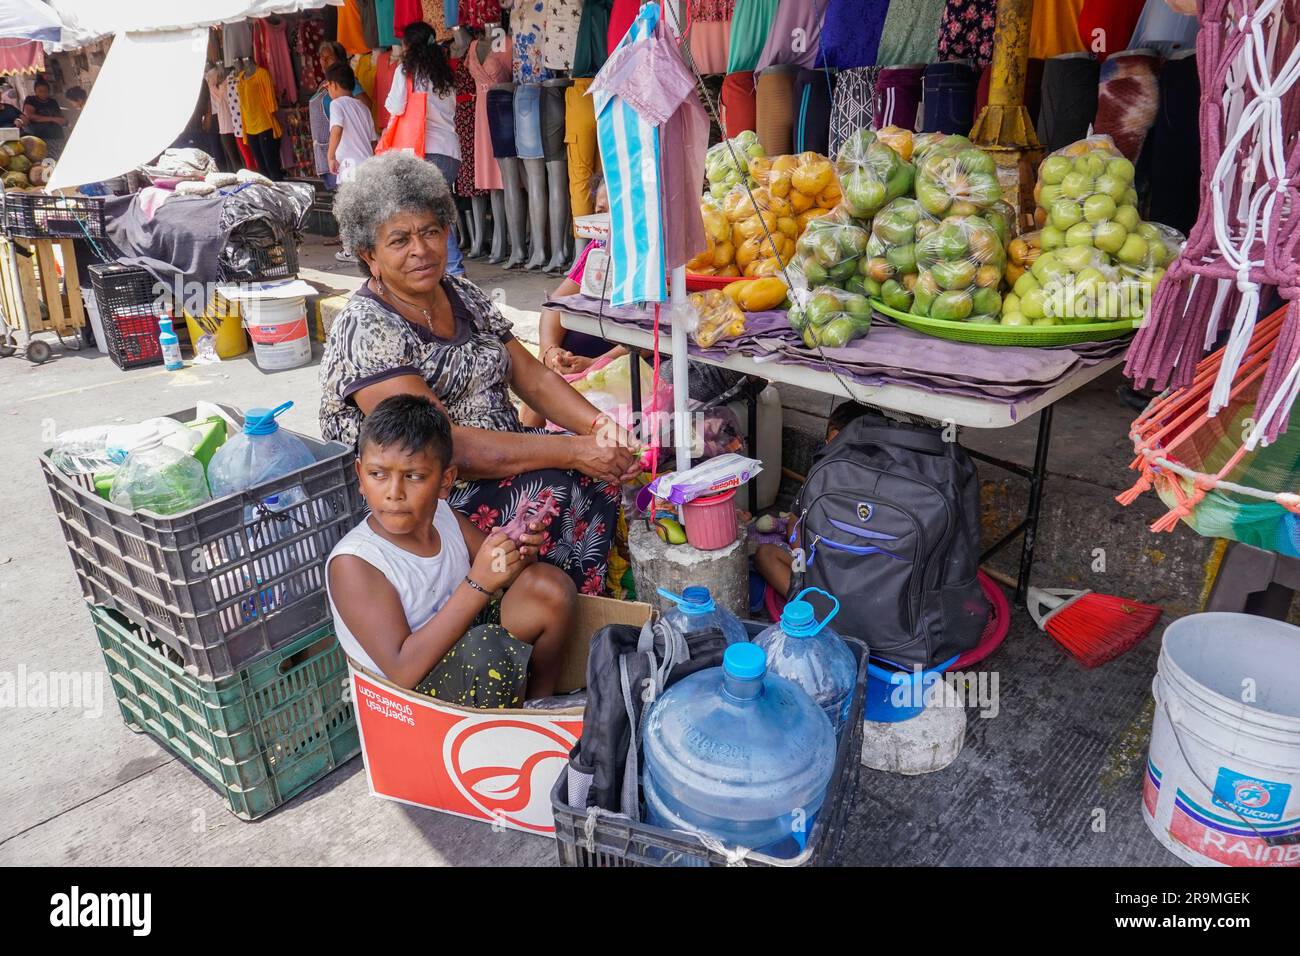 María Baños takes care of her grandson, Hashyar Zamora Ávila, 8, at her fruit stand in Chilpancingo de los Bravo, Guerrero, Mexico on April 23, 2023, while her daughter works. (Avigaí Silva/Global Press Journal) Stock Photo